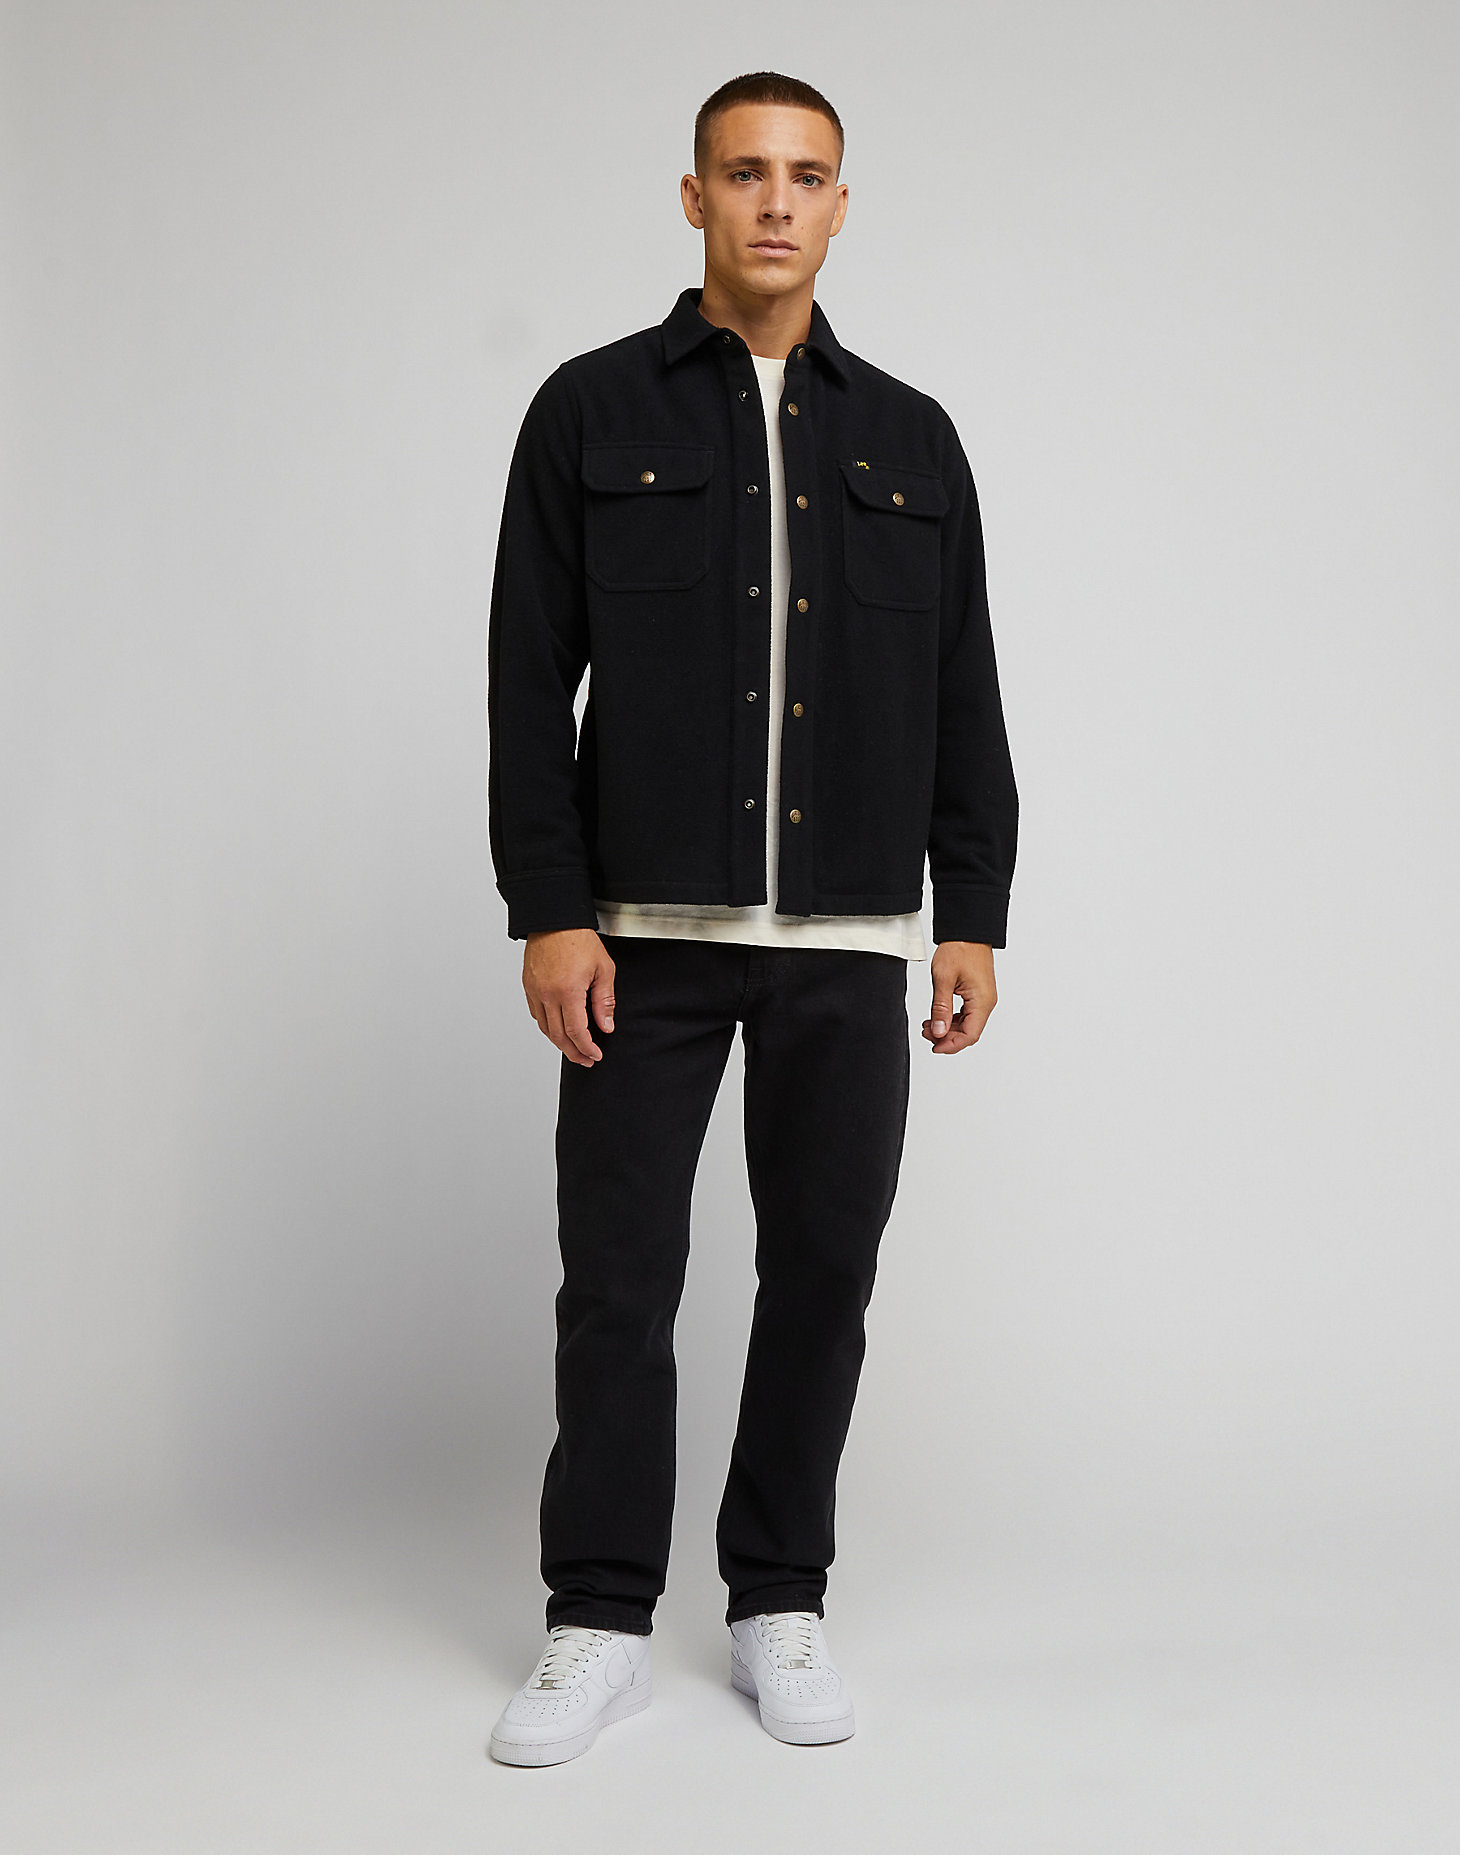 101 Overshirt in Washed Black alternative view 4